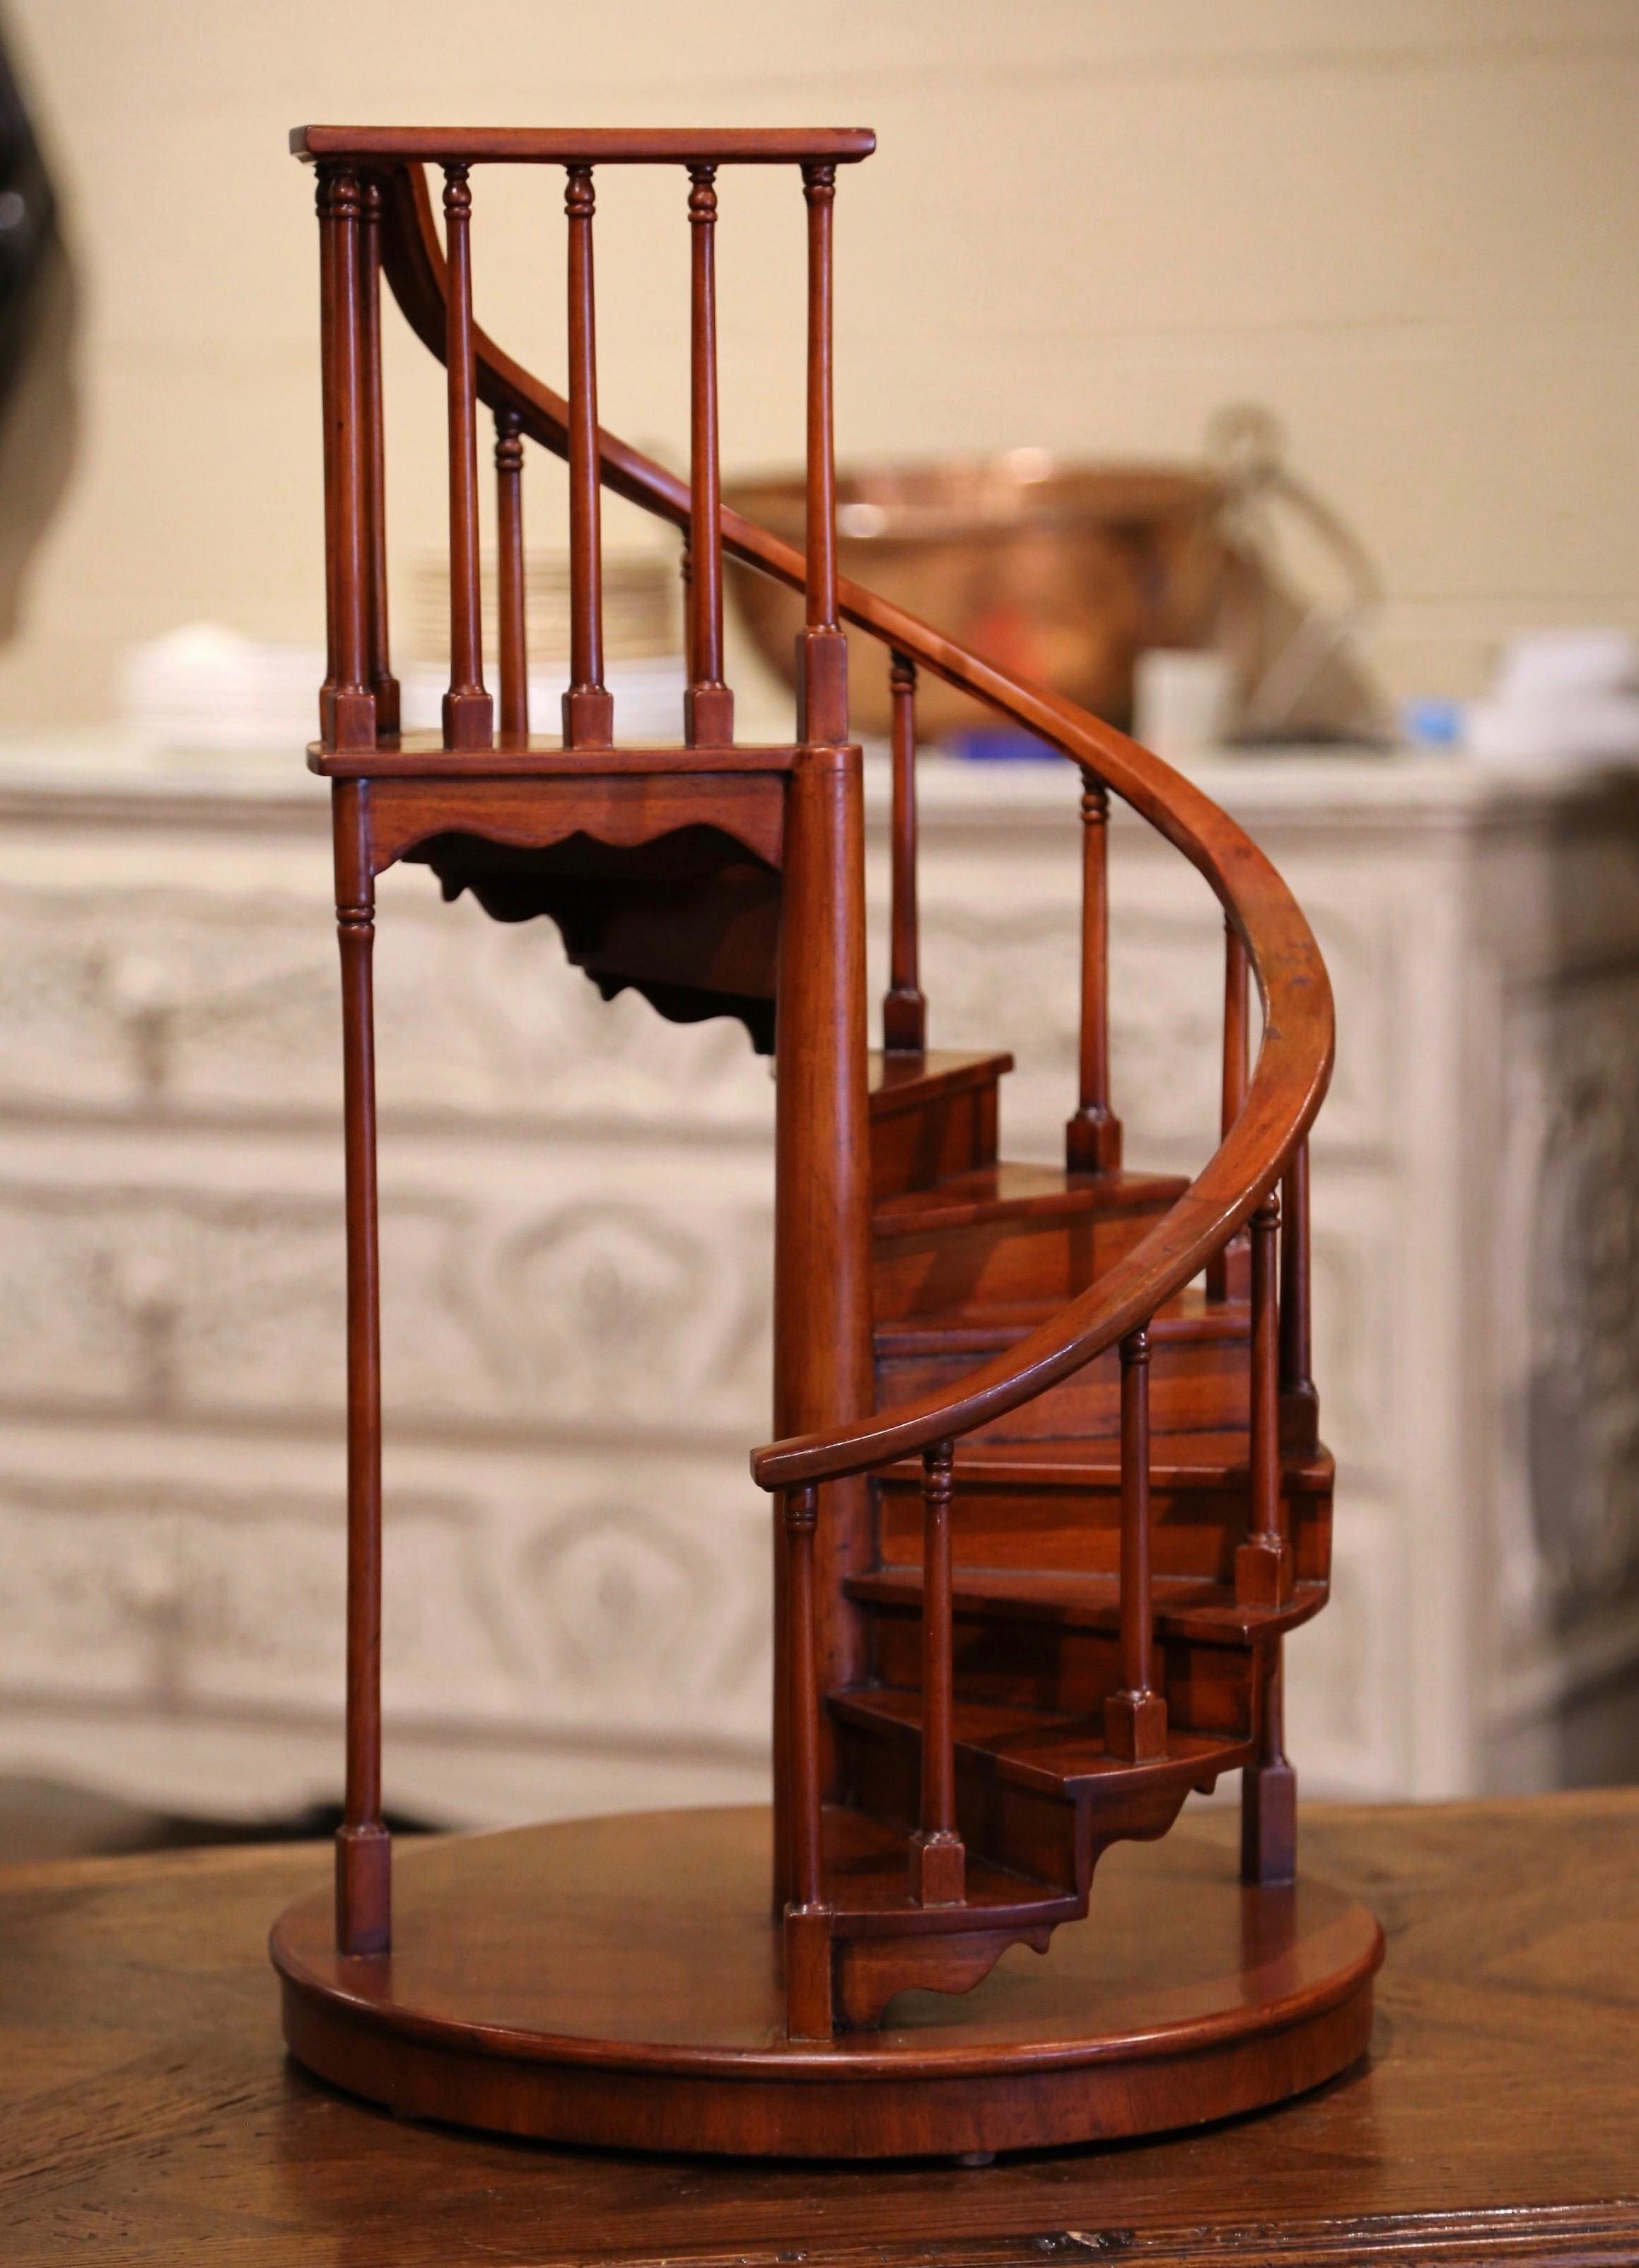 Decorate an office or study with this elegant petite architect staircase; hand carved in England circa 1950 and made of mahogany, the stair model rests on a circular base over a central stem, and features ten spiraling stairs decorated with